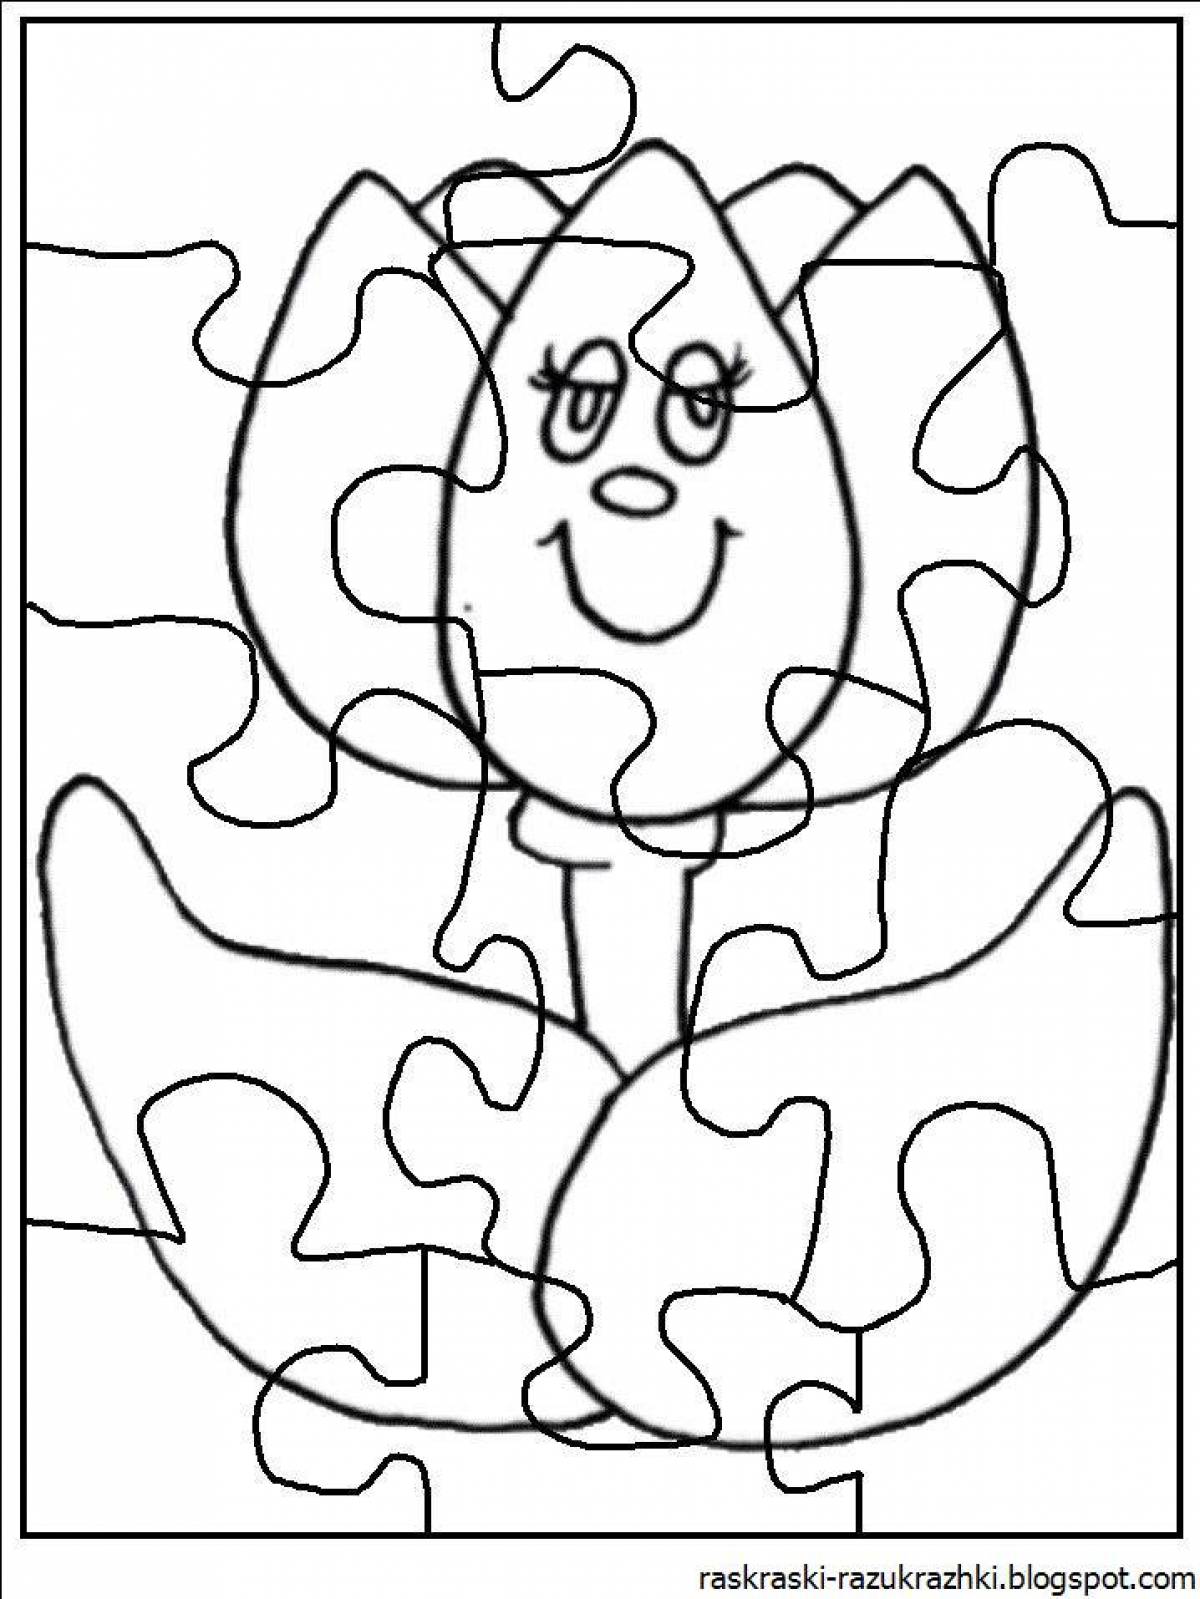 Exciting puzzle coloring book